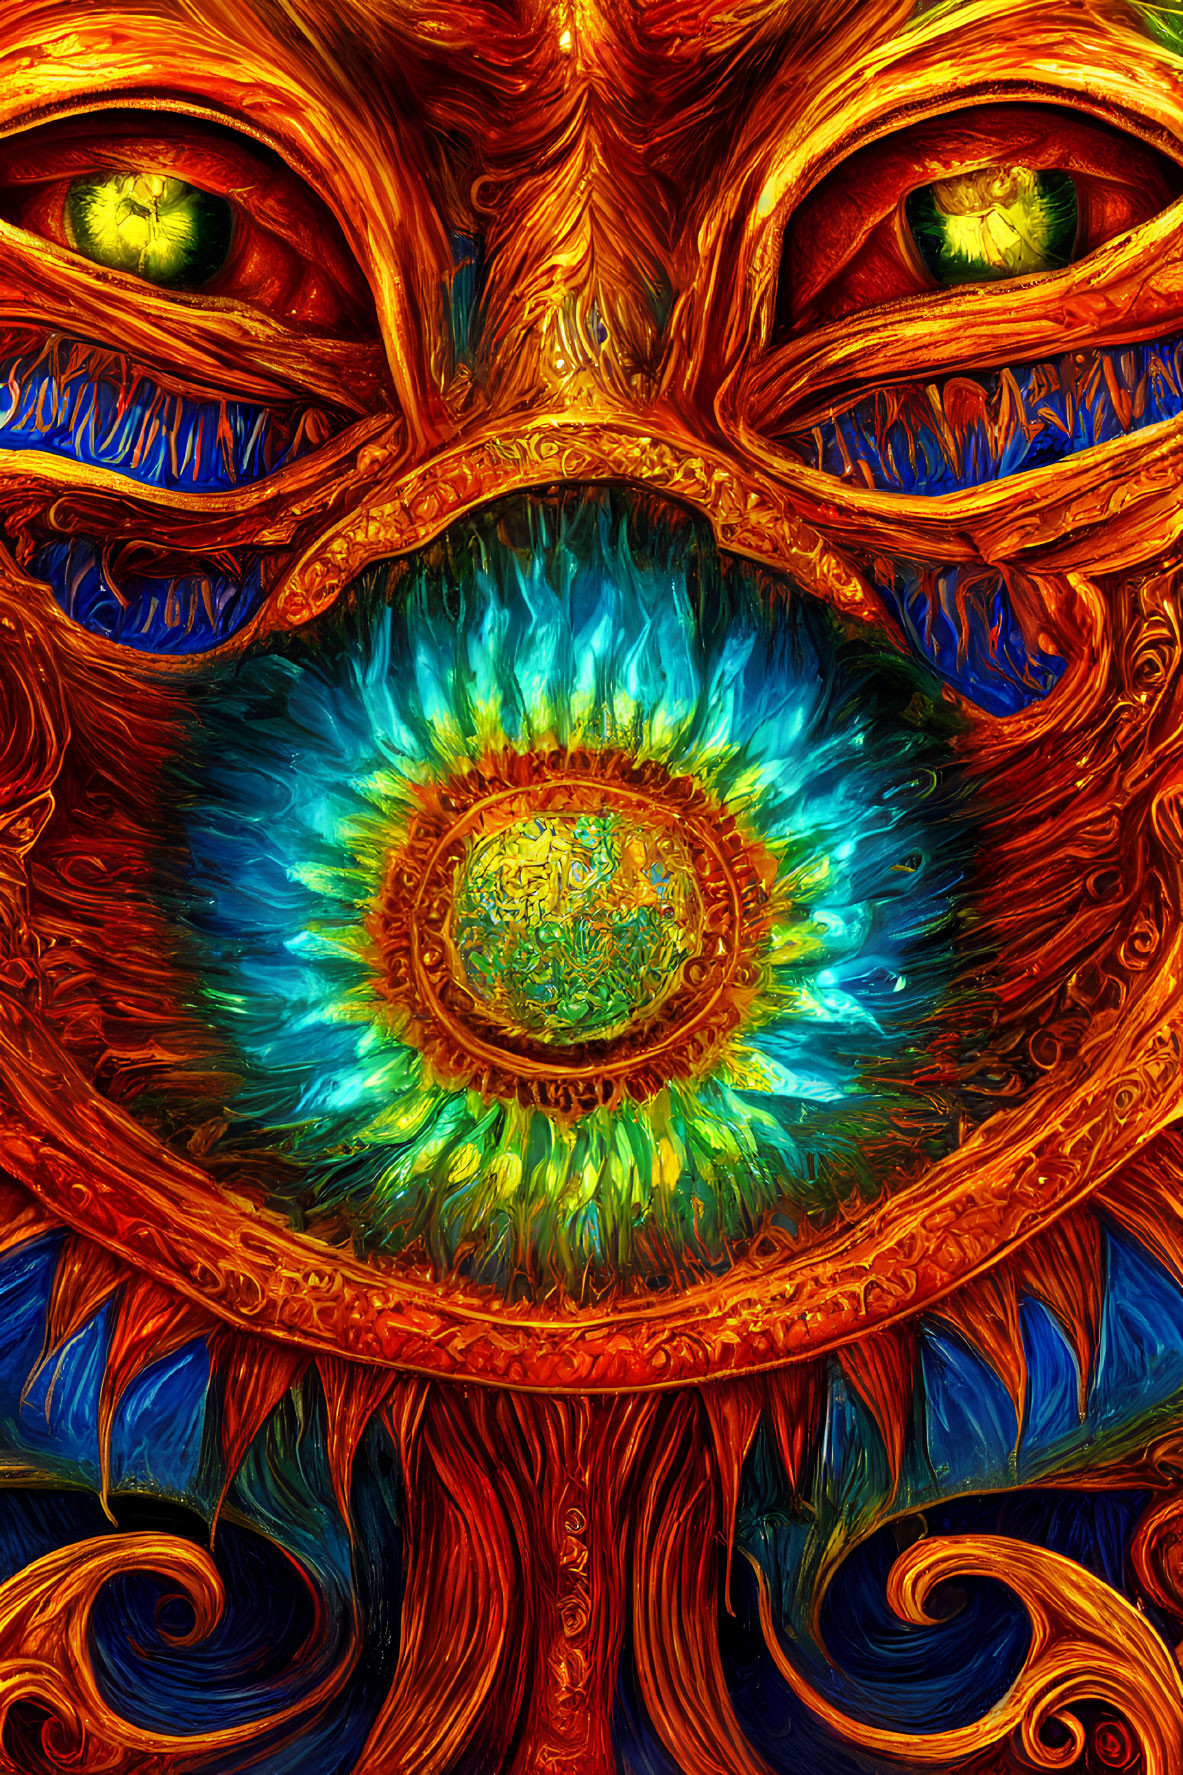 Abstract swirling patterns in fiery colors with central blue eye and two green eyes